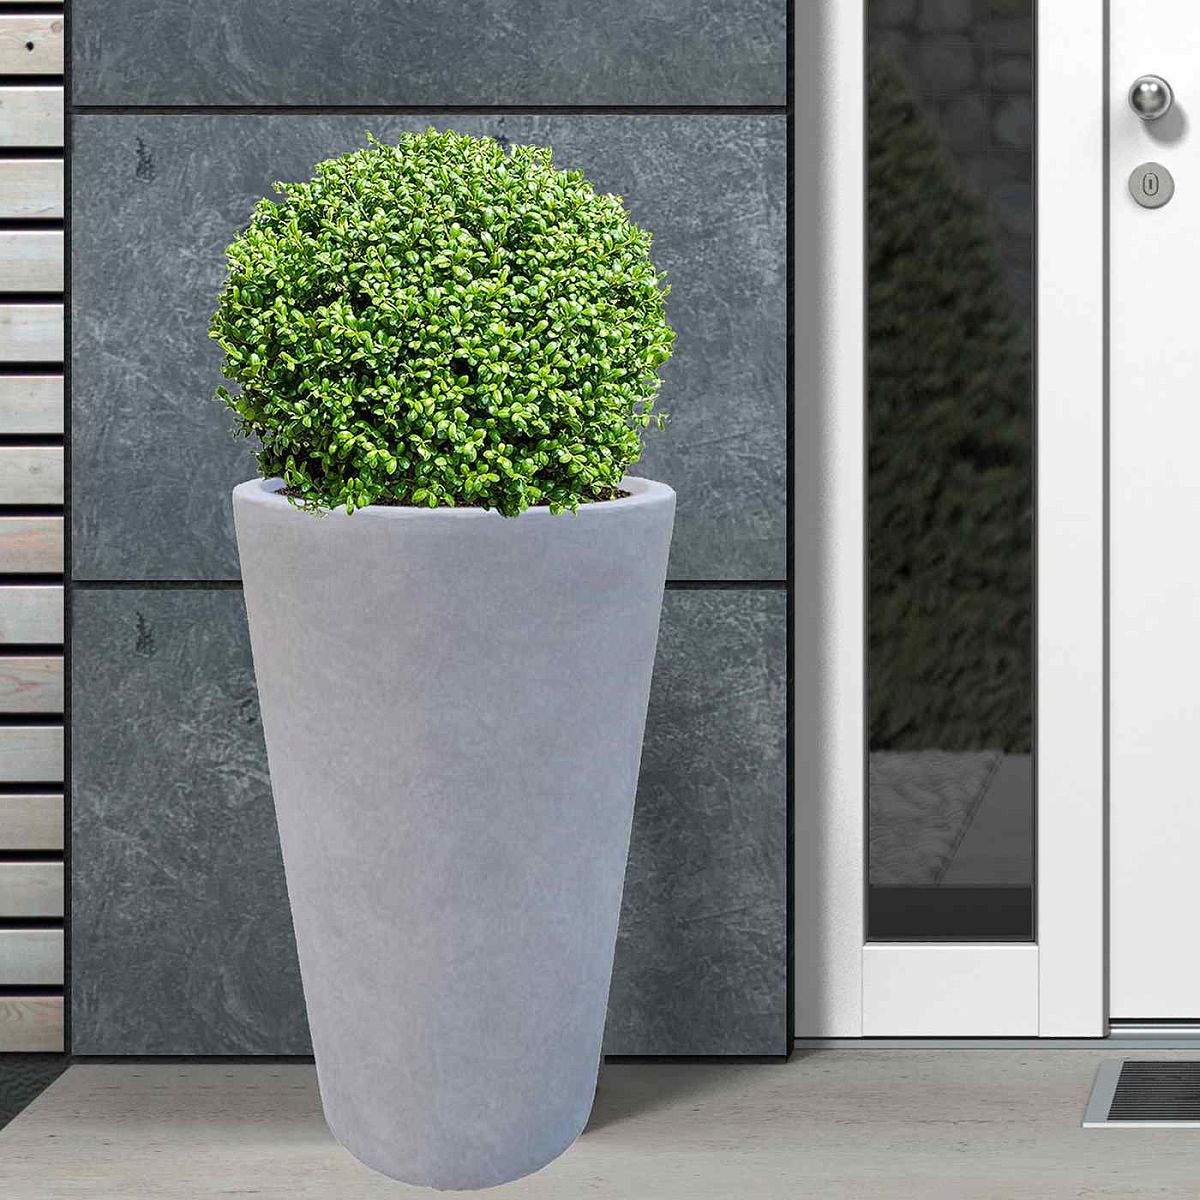 Outdoor Planters | 20+ Color Options - ePlanters